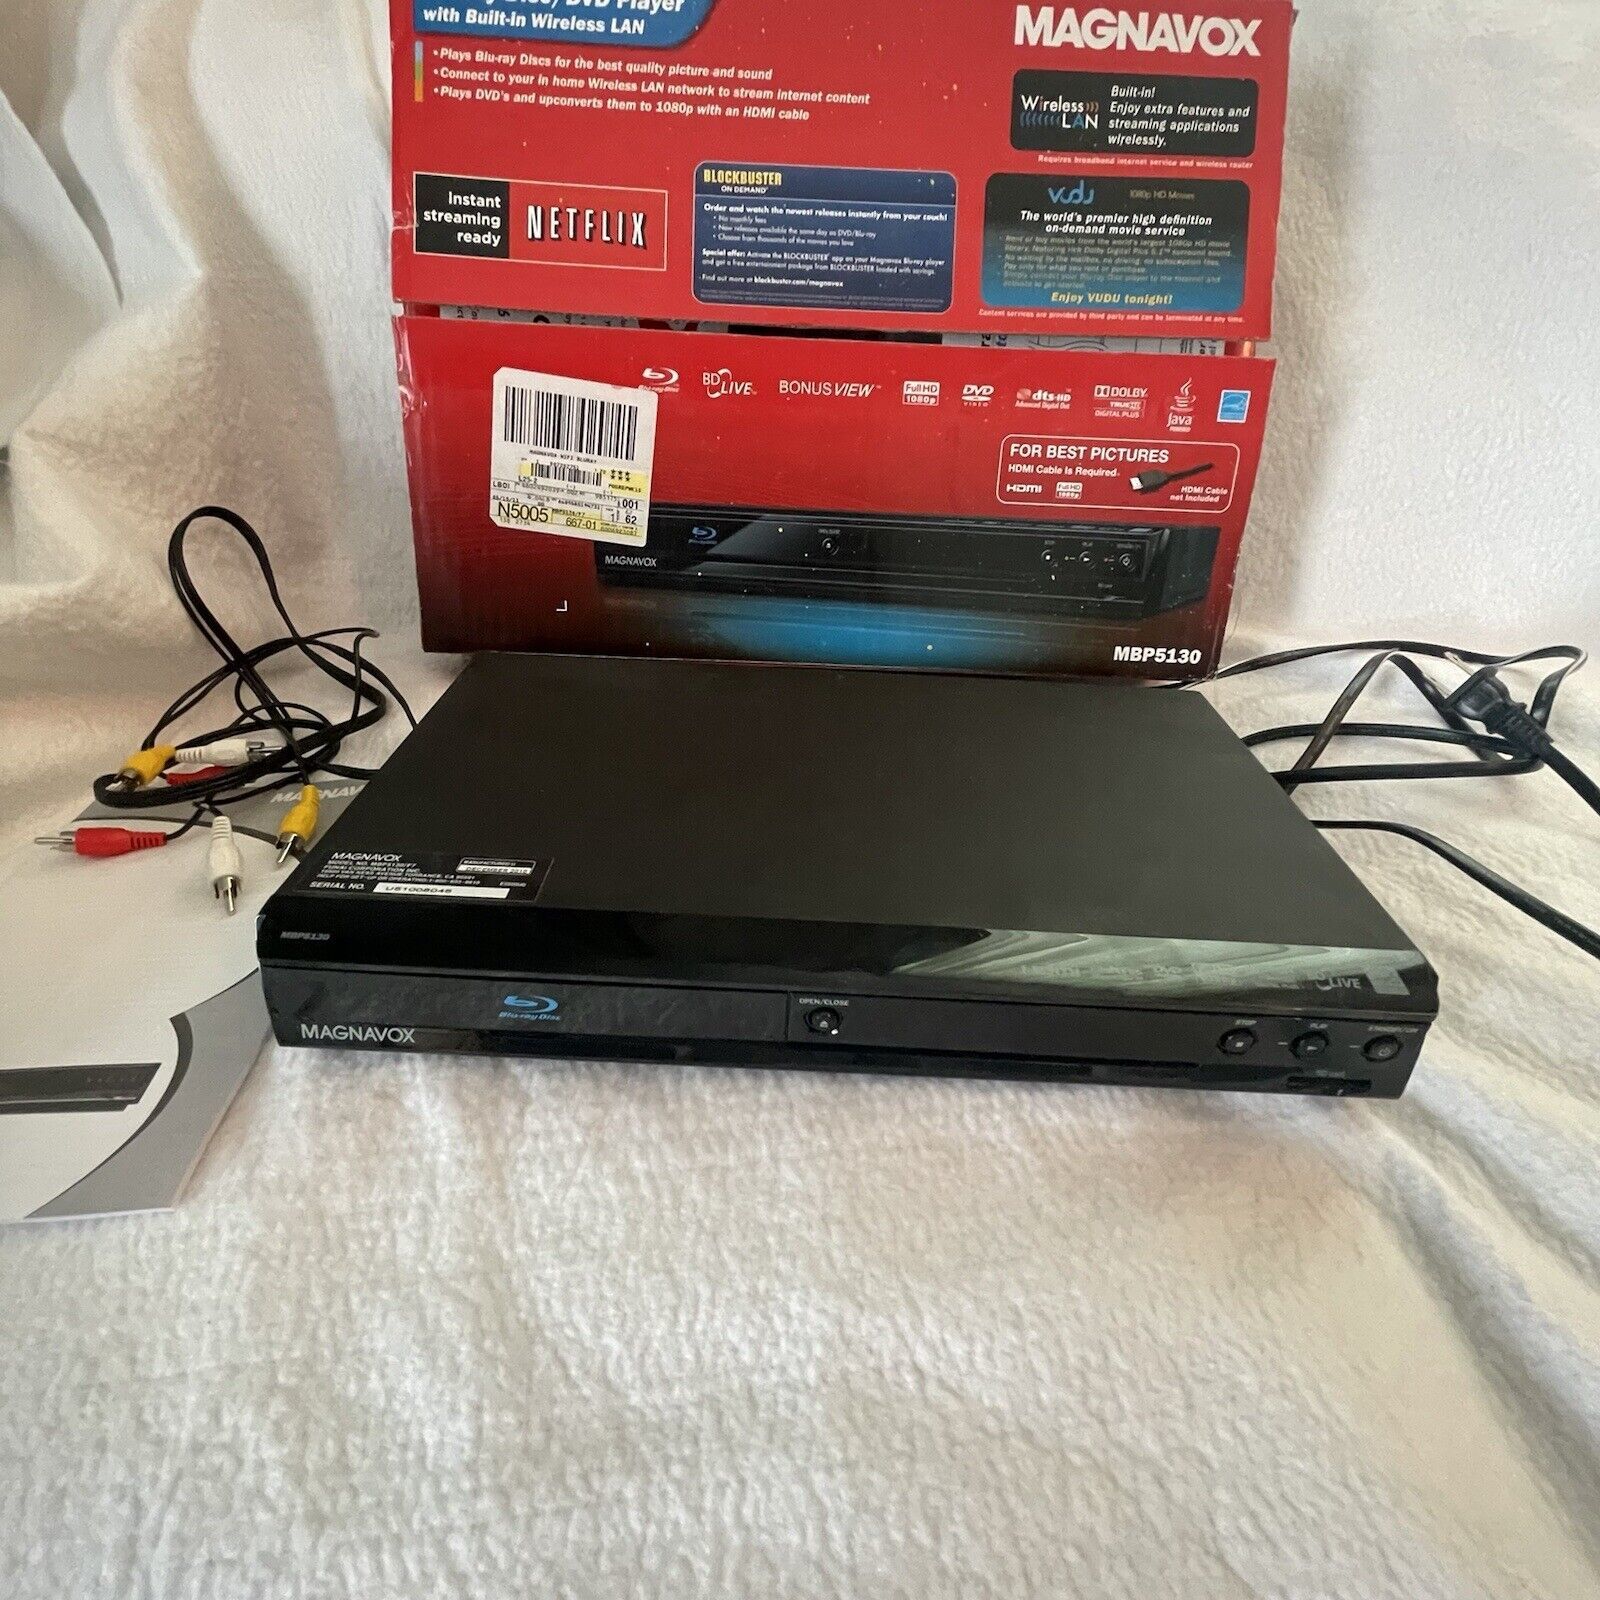 Magnavox MBP5130 Blue Ray Player In Original Box Tested Works With Cables - $18.65